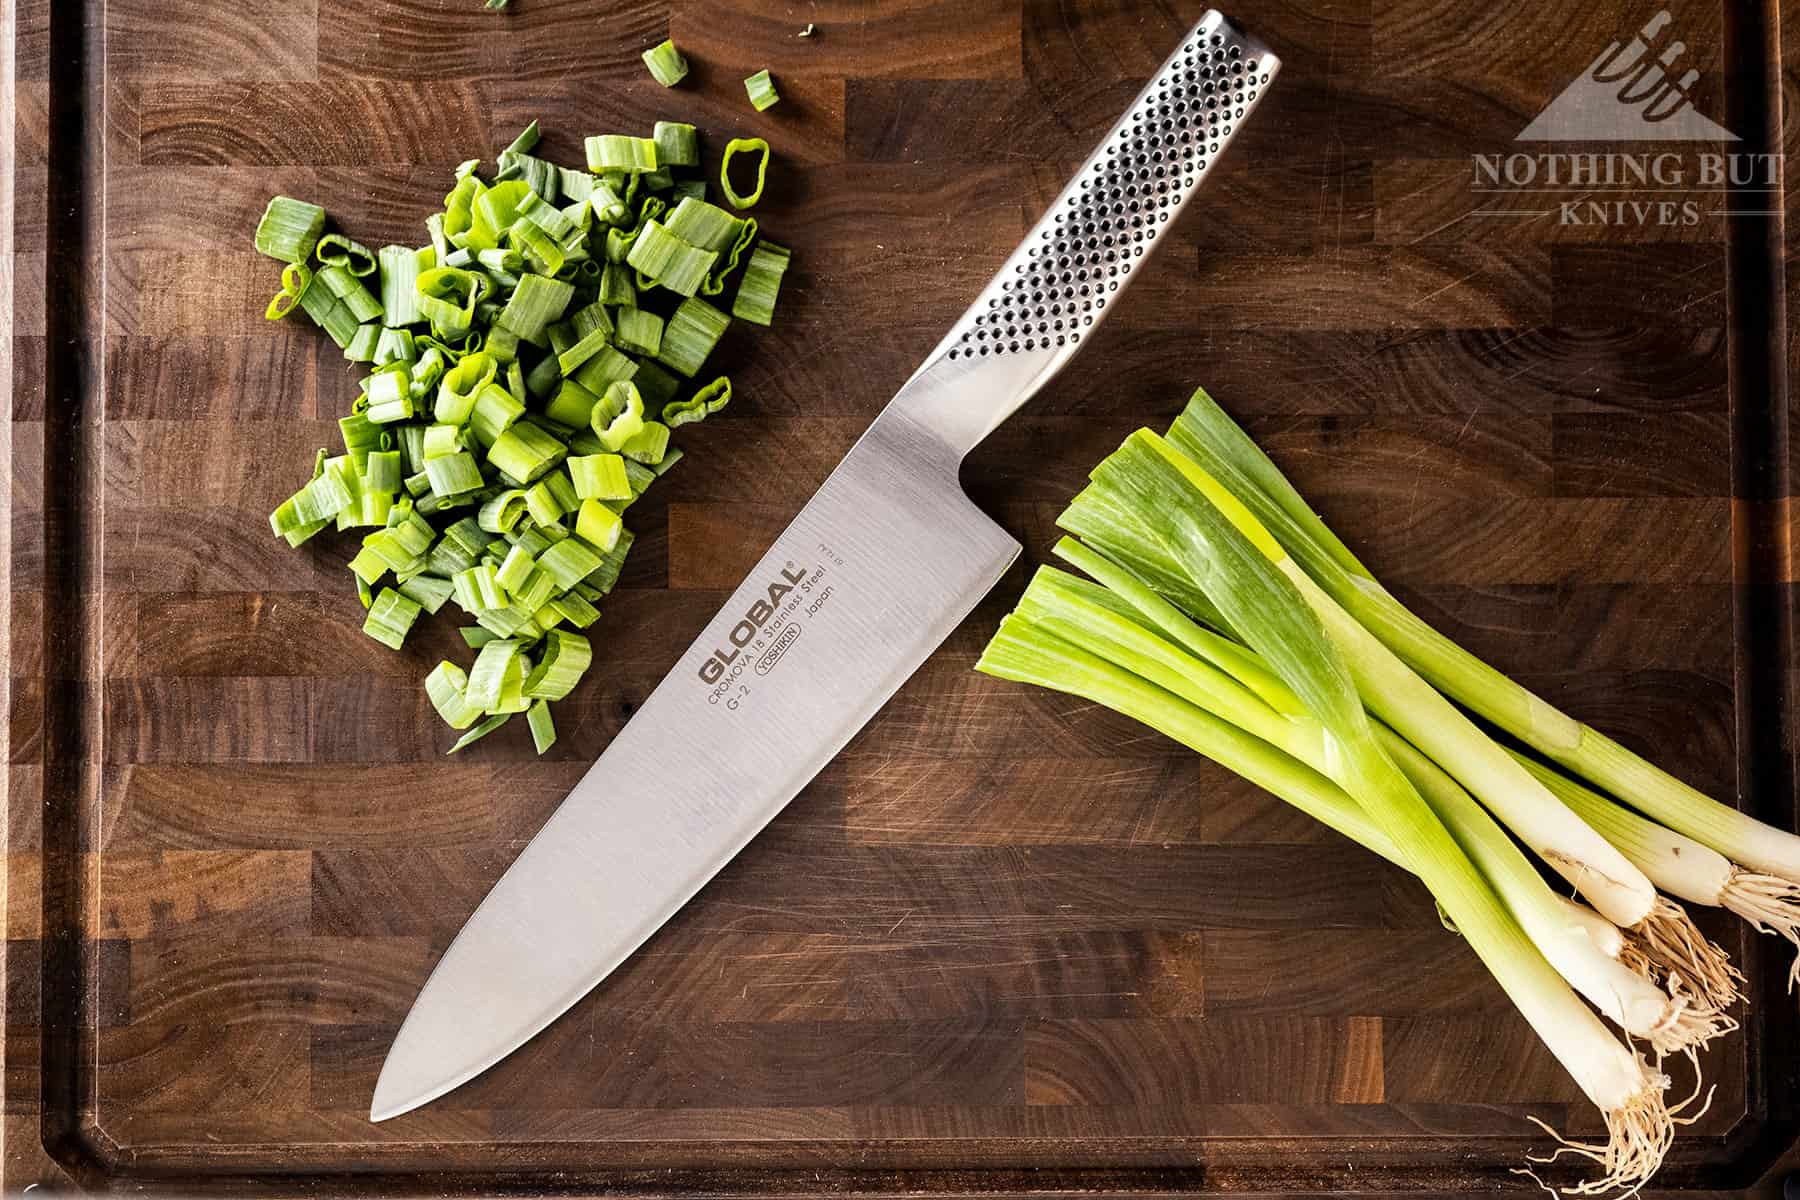 The Glabal G-2 chef knife easily diced up these green onions.